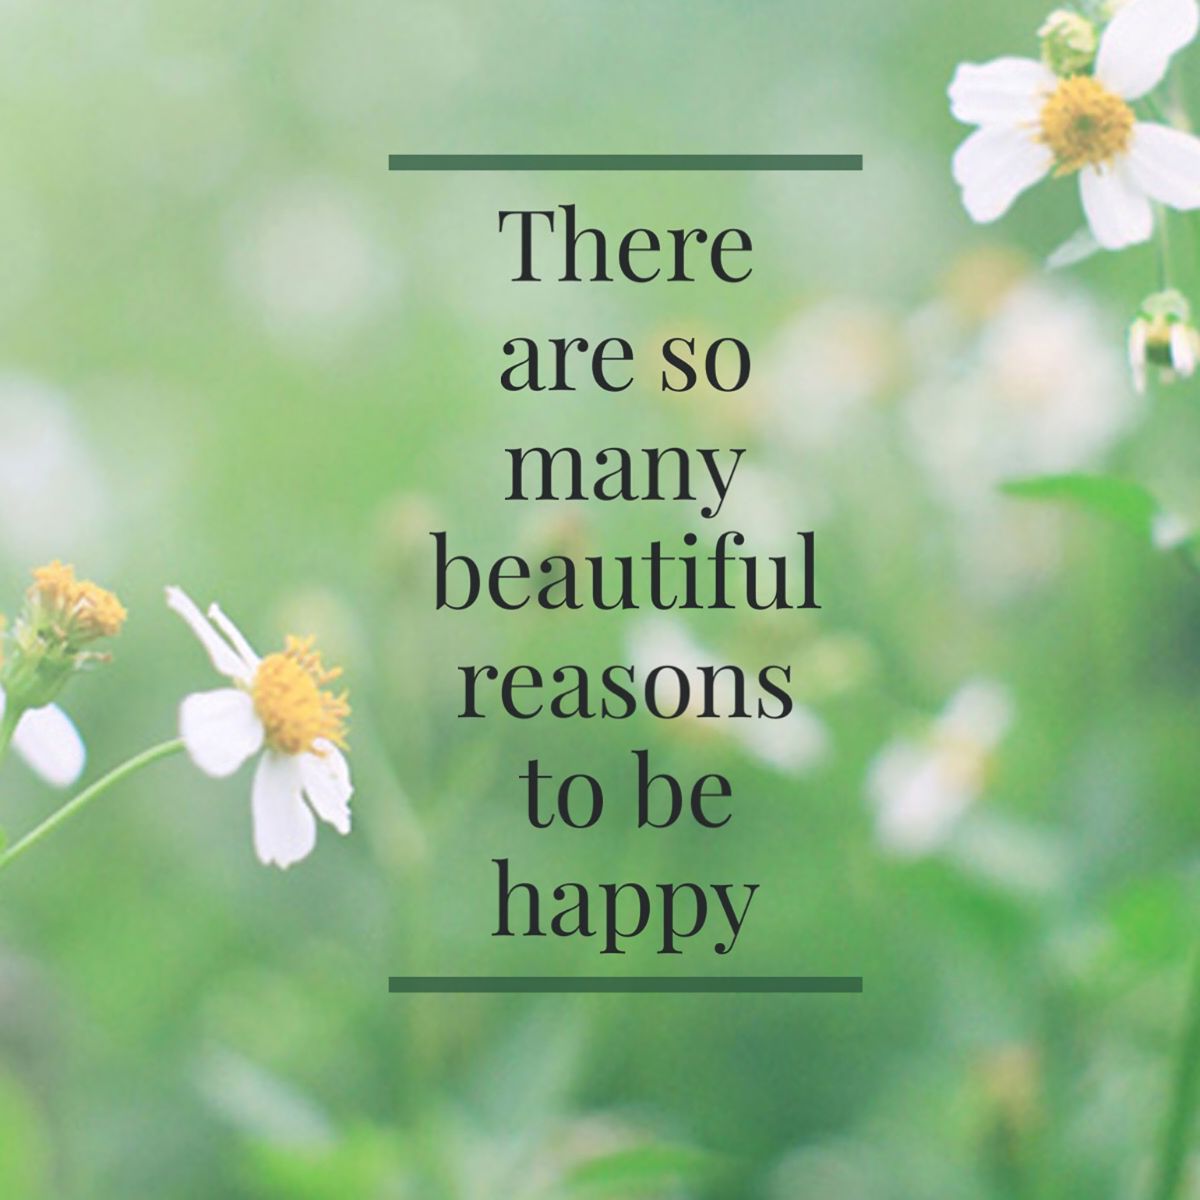 Quote: there are so many beautiful reasons to be happy!